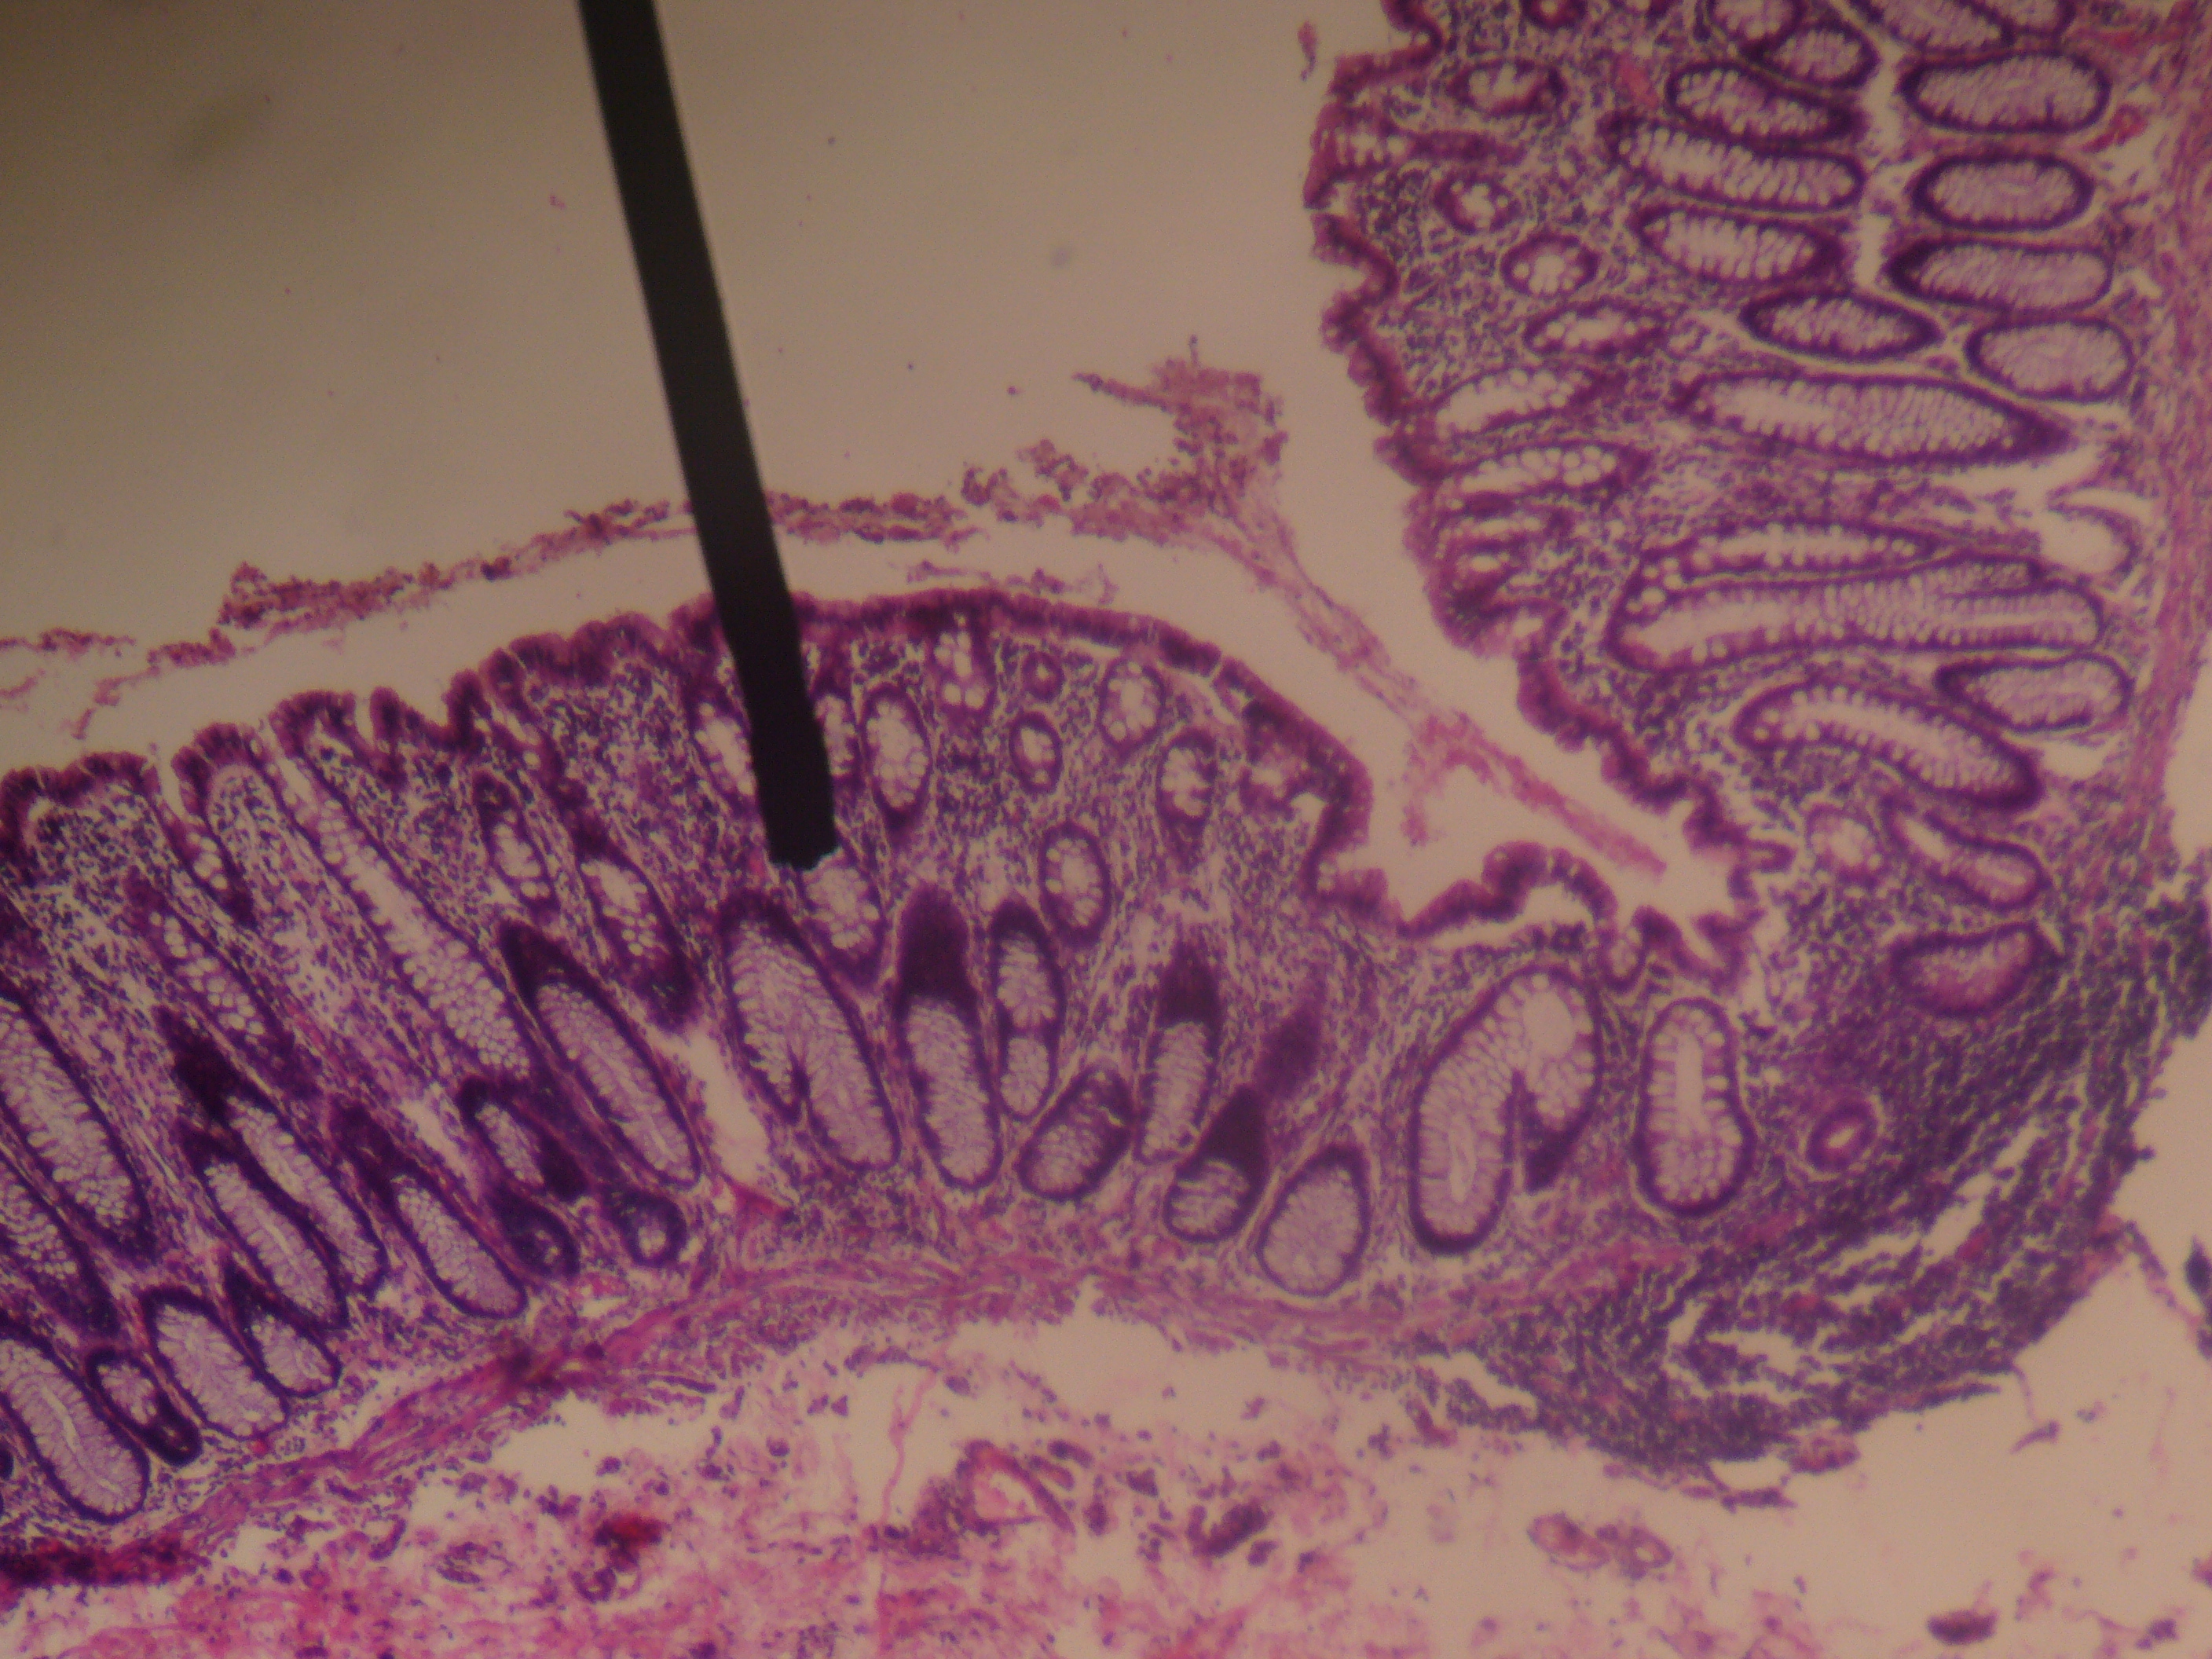 Cross section microscopic shot of the rectal wall.